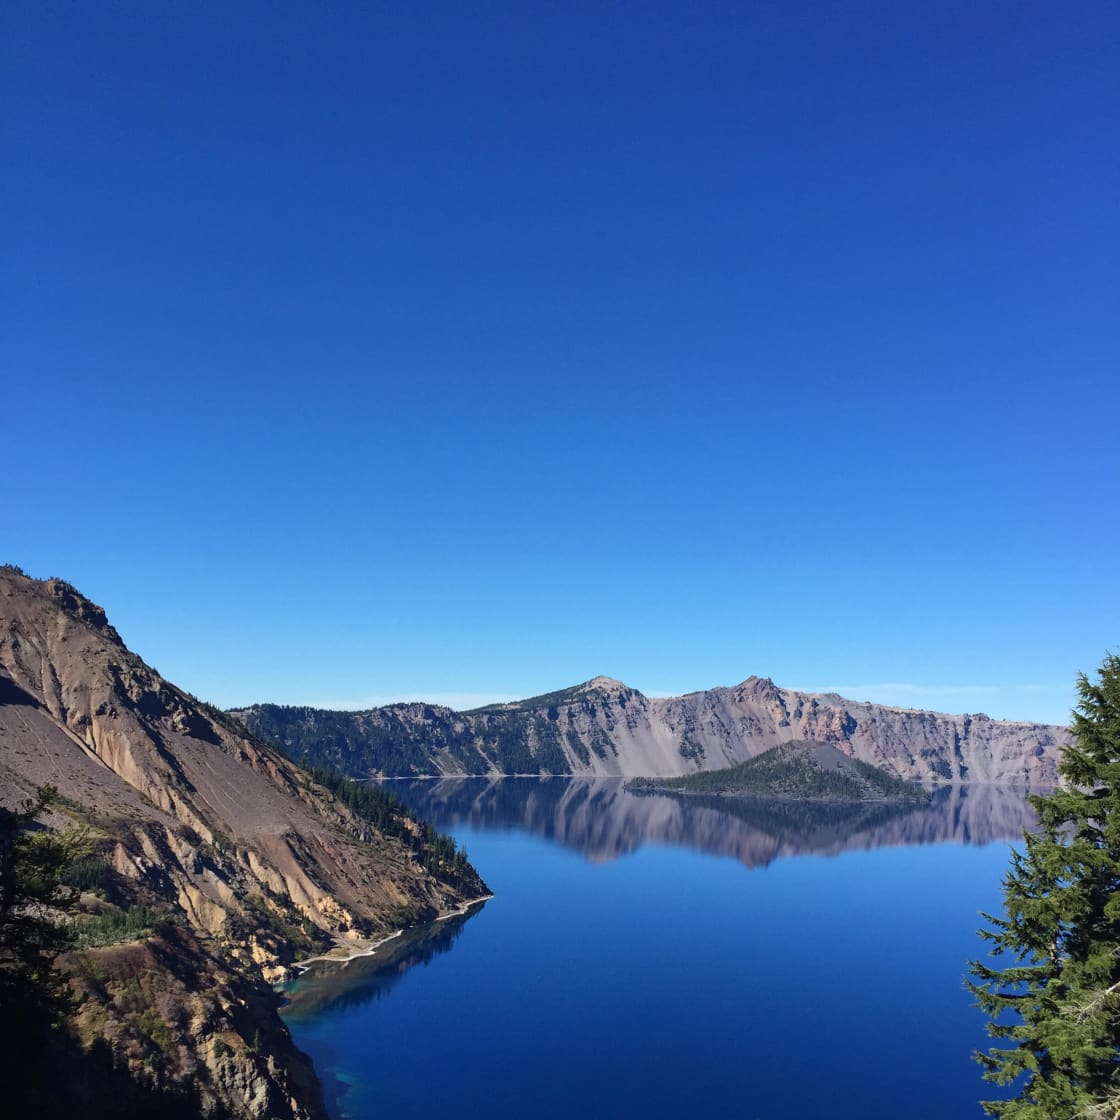 The calm after the storm brought about a bright blue sky day with mirror like conditions on the lake. The weather system during our time at Crater Lake allowed us to experience both ends of the spectrum from choppy lake to still water.